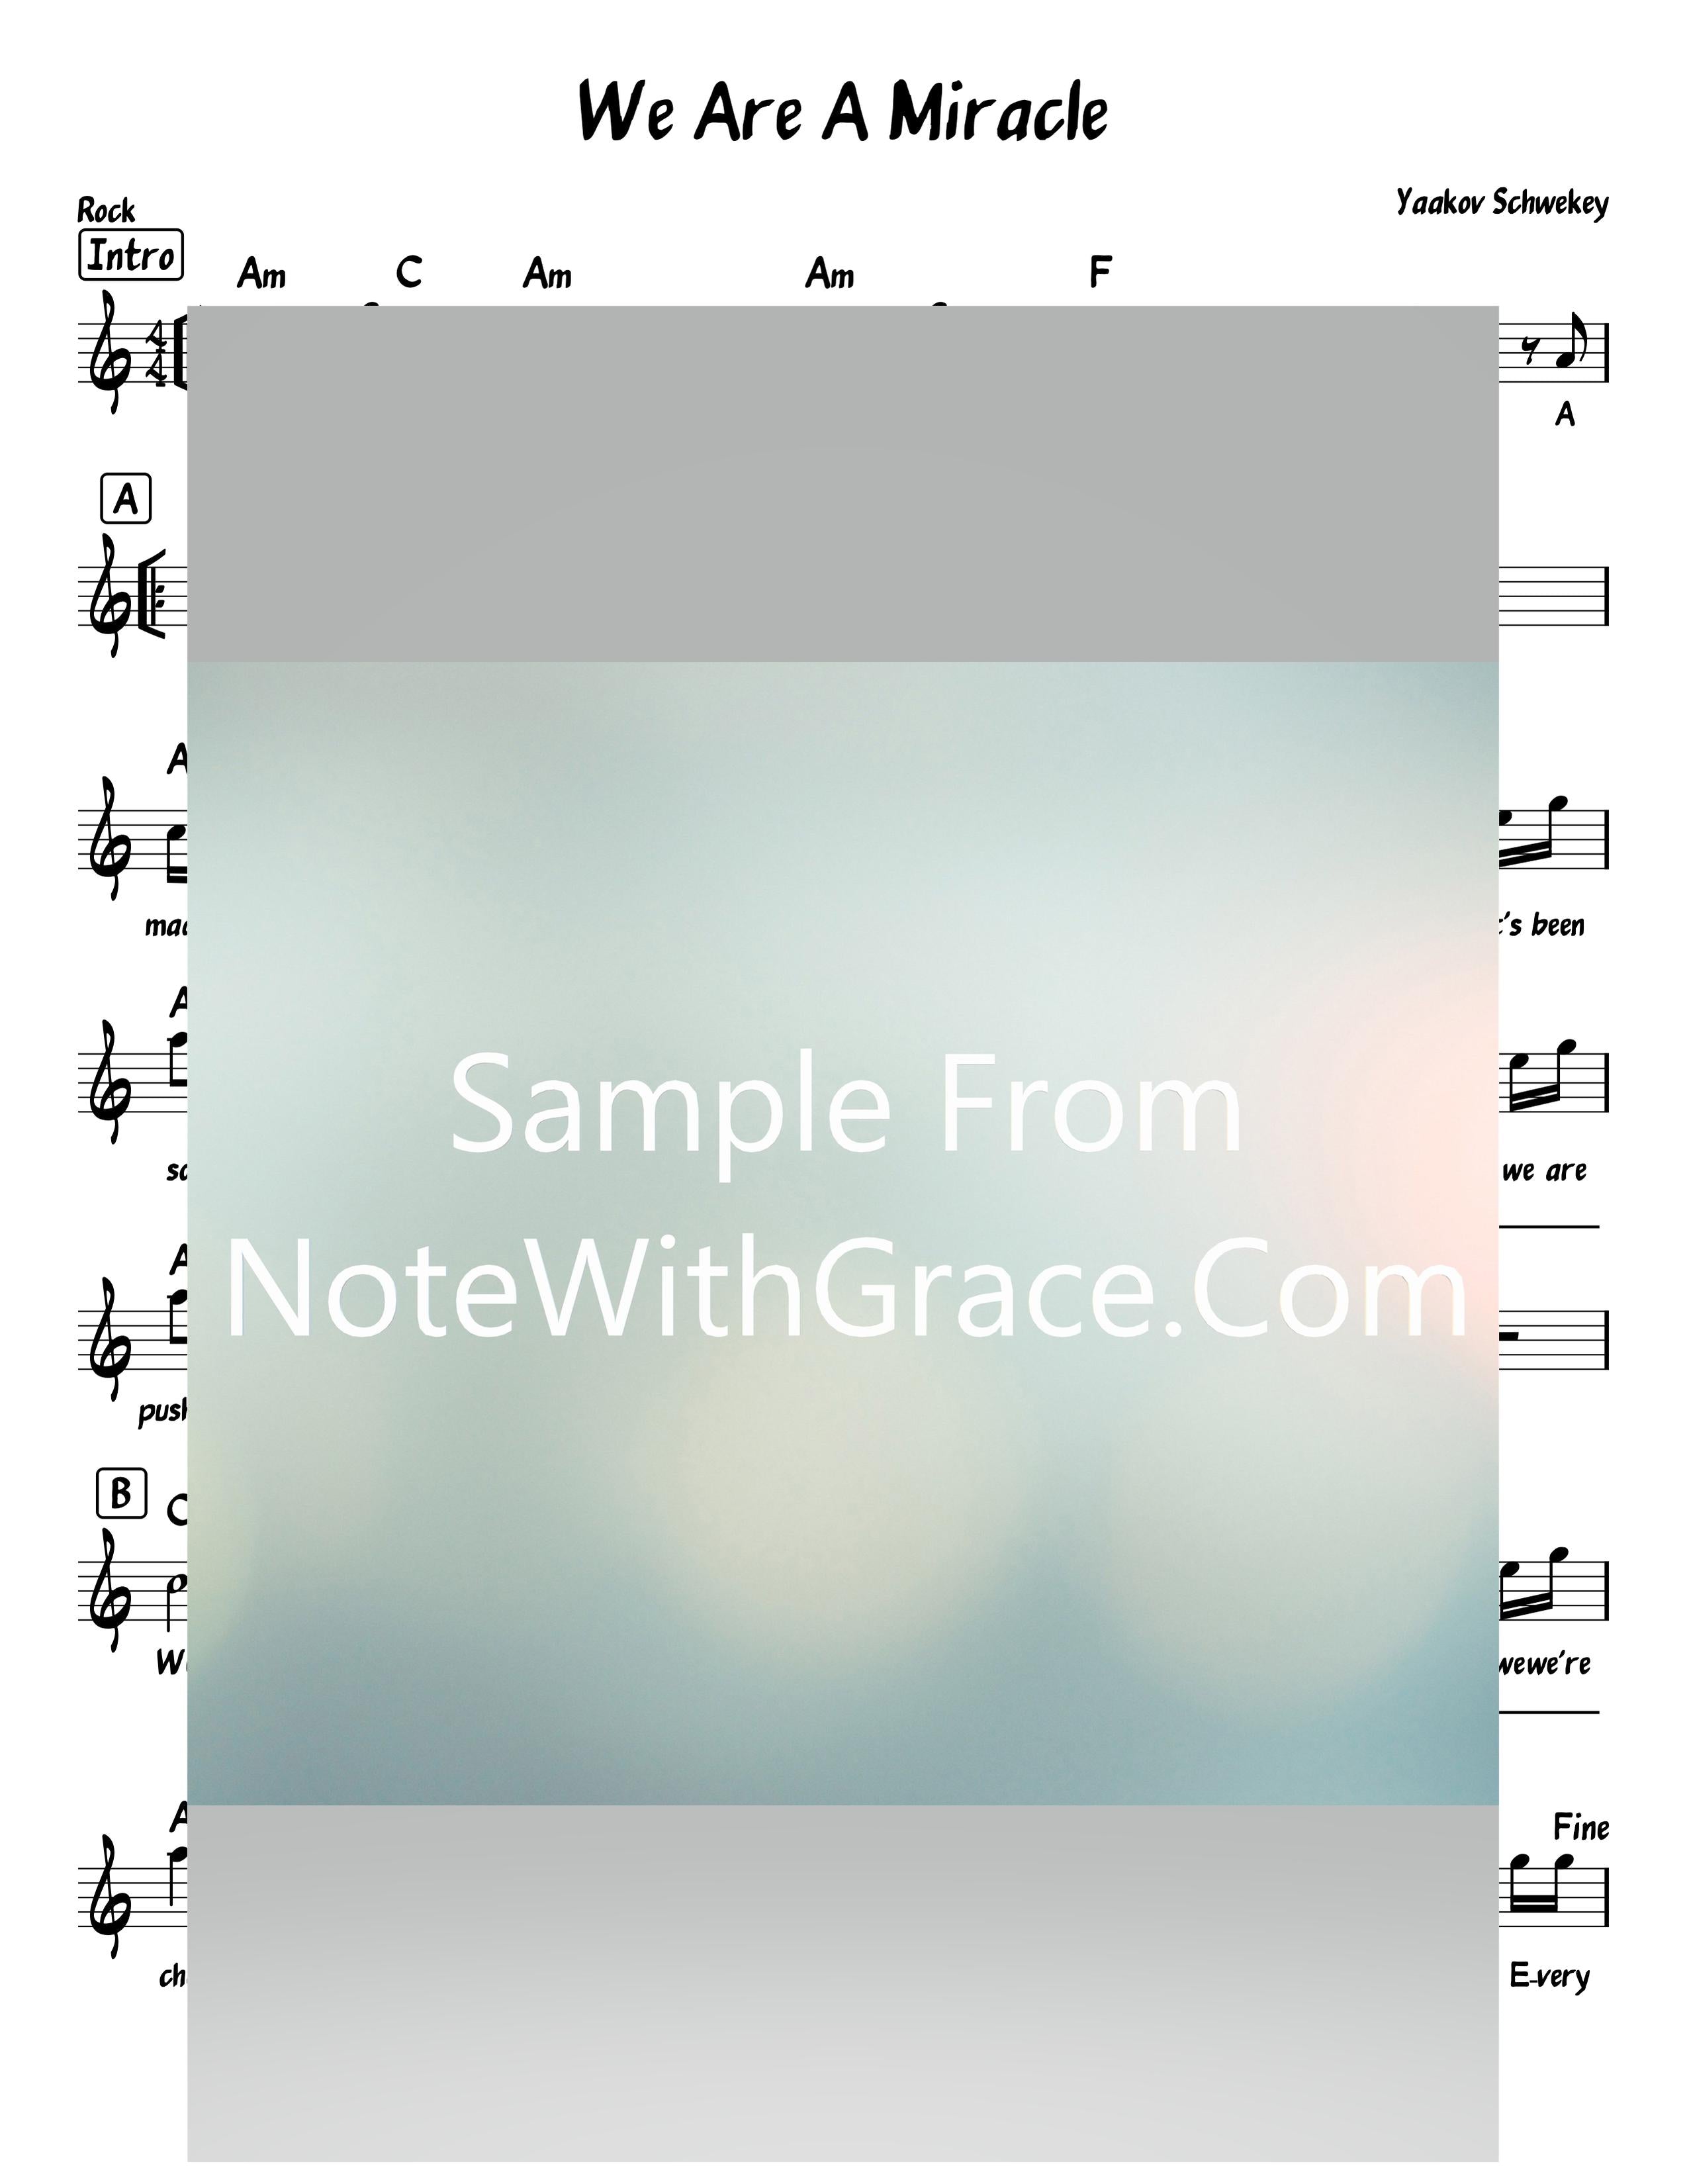 We Are A Miracle Lead Sheet (Yaakov Schwekey) Album: Single 2016-Sheet music-NoteWithGrace.com